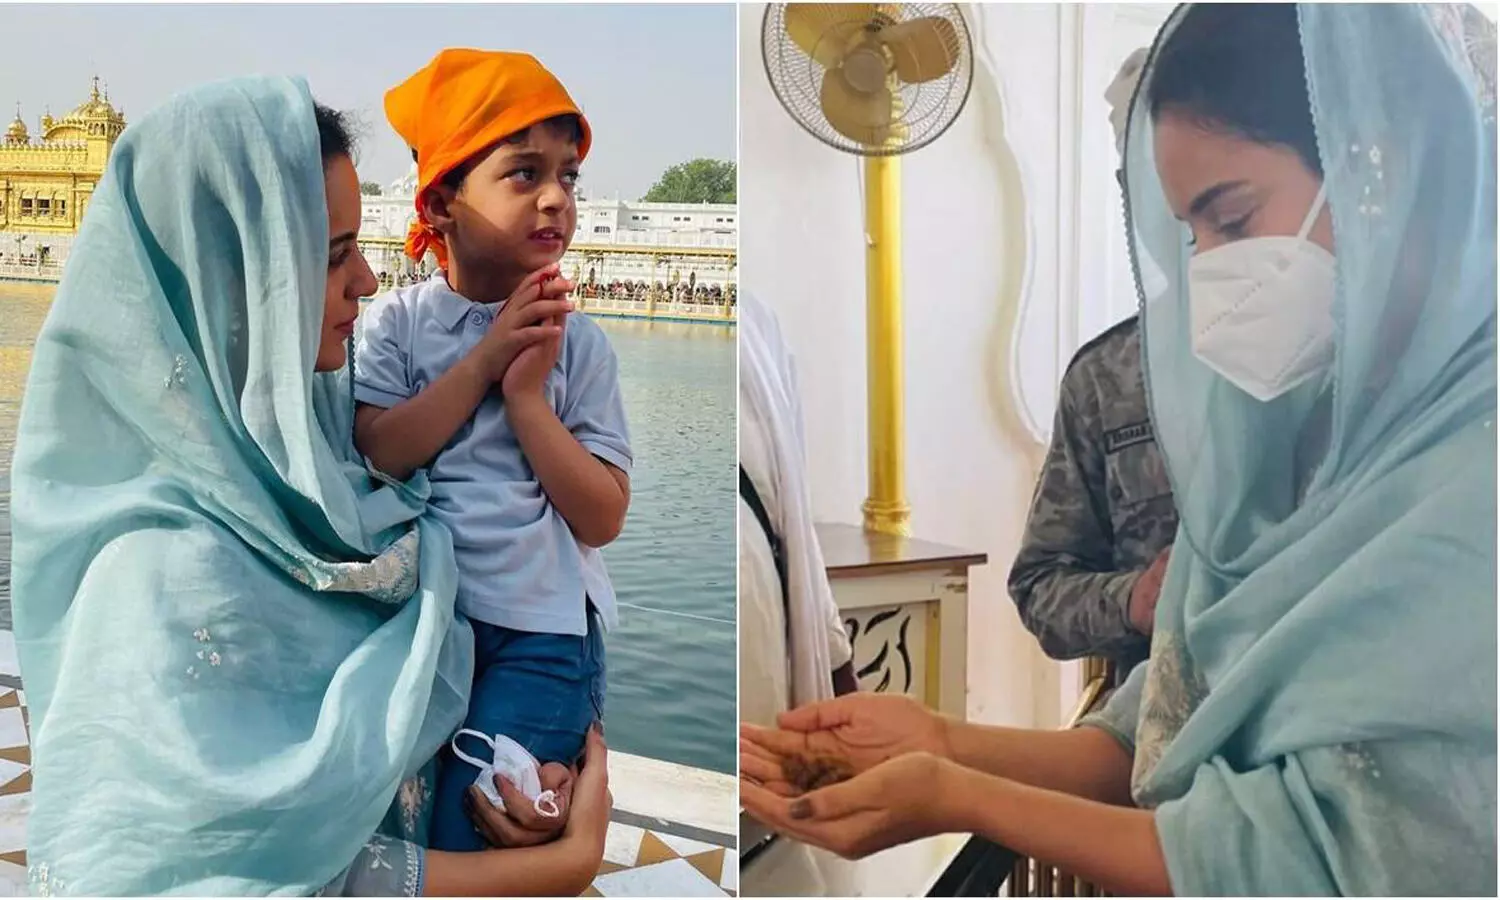 Kangana Ranauts Golden Temple visit sparks speculations about her political ambitions